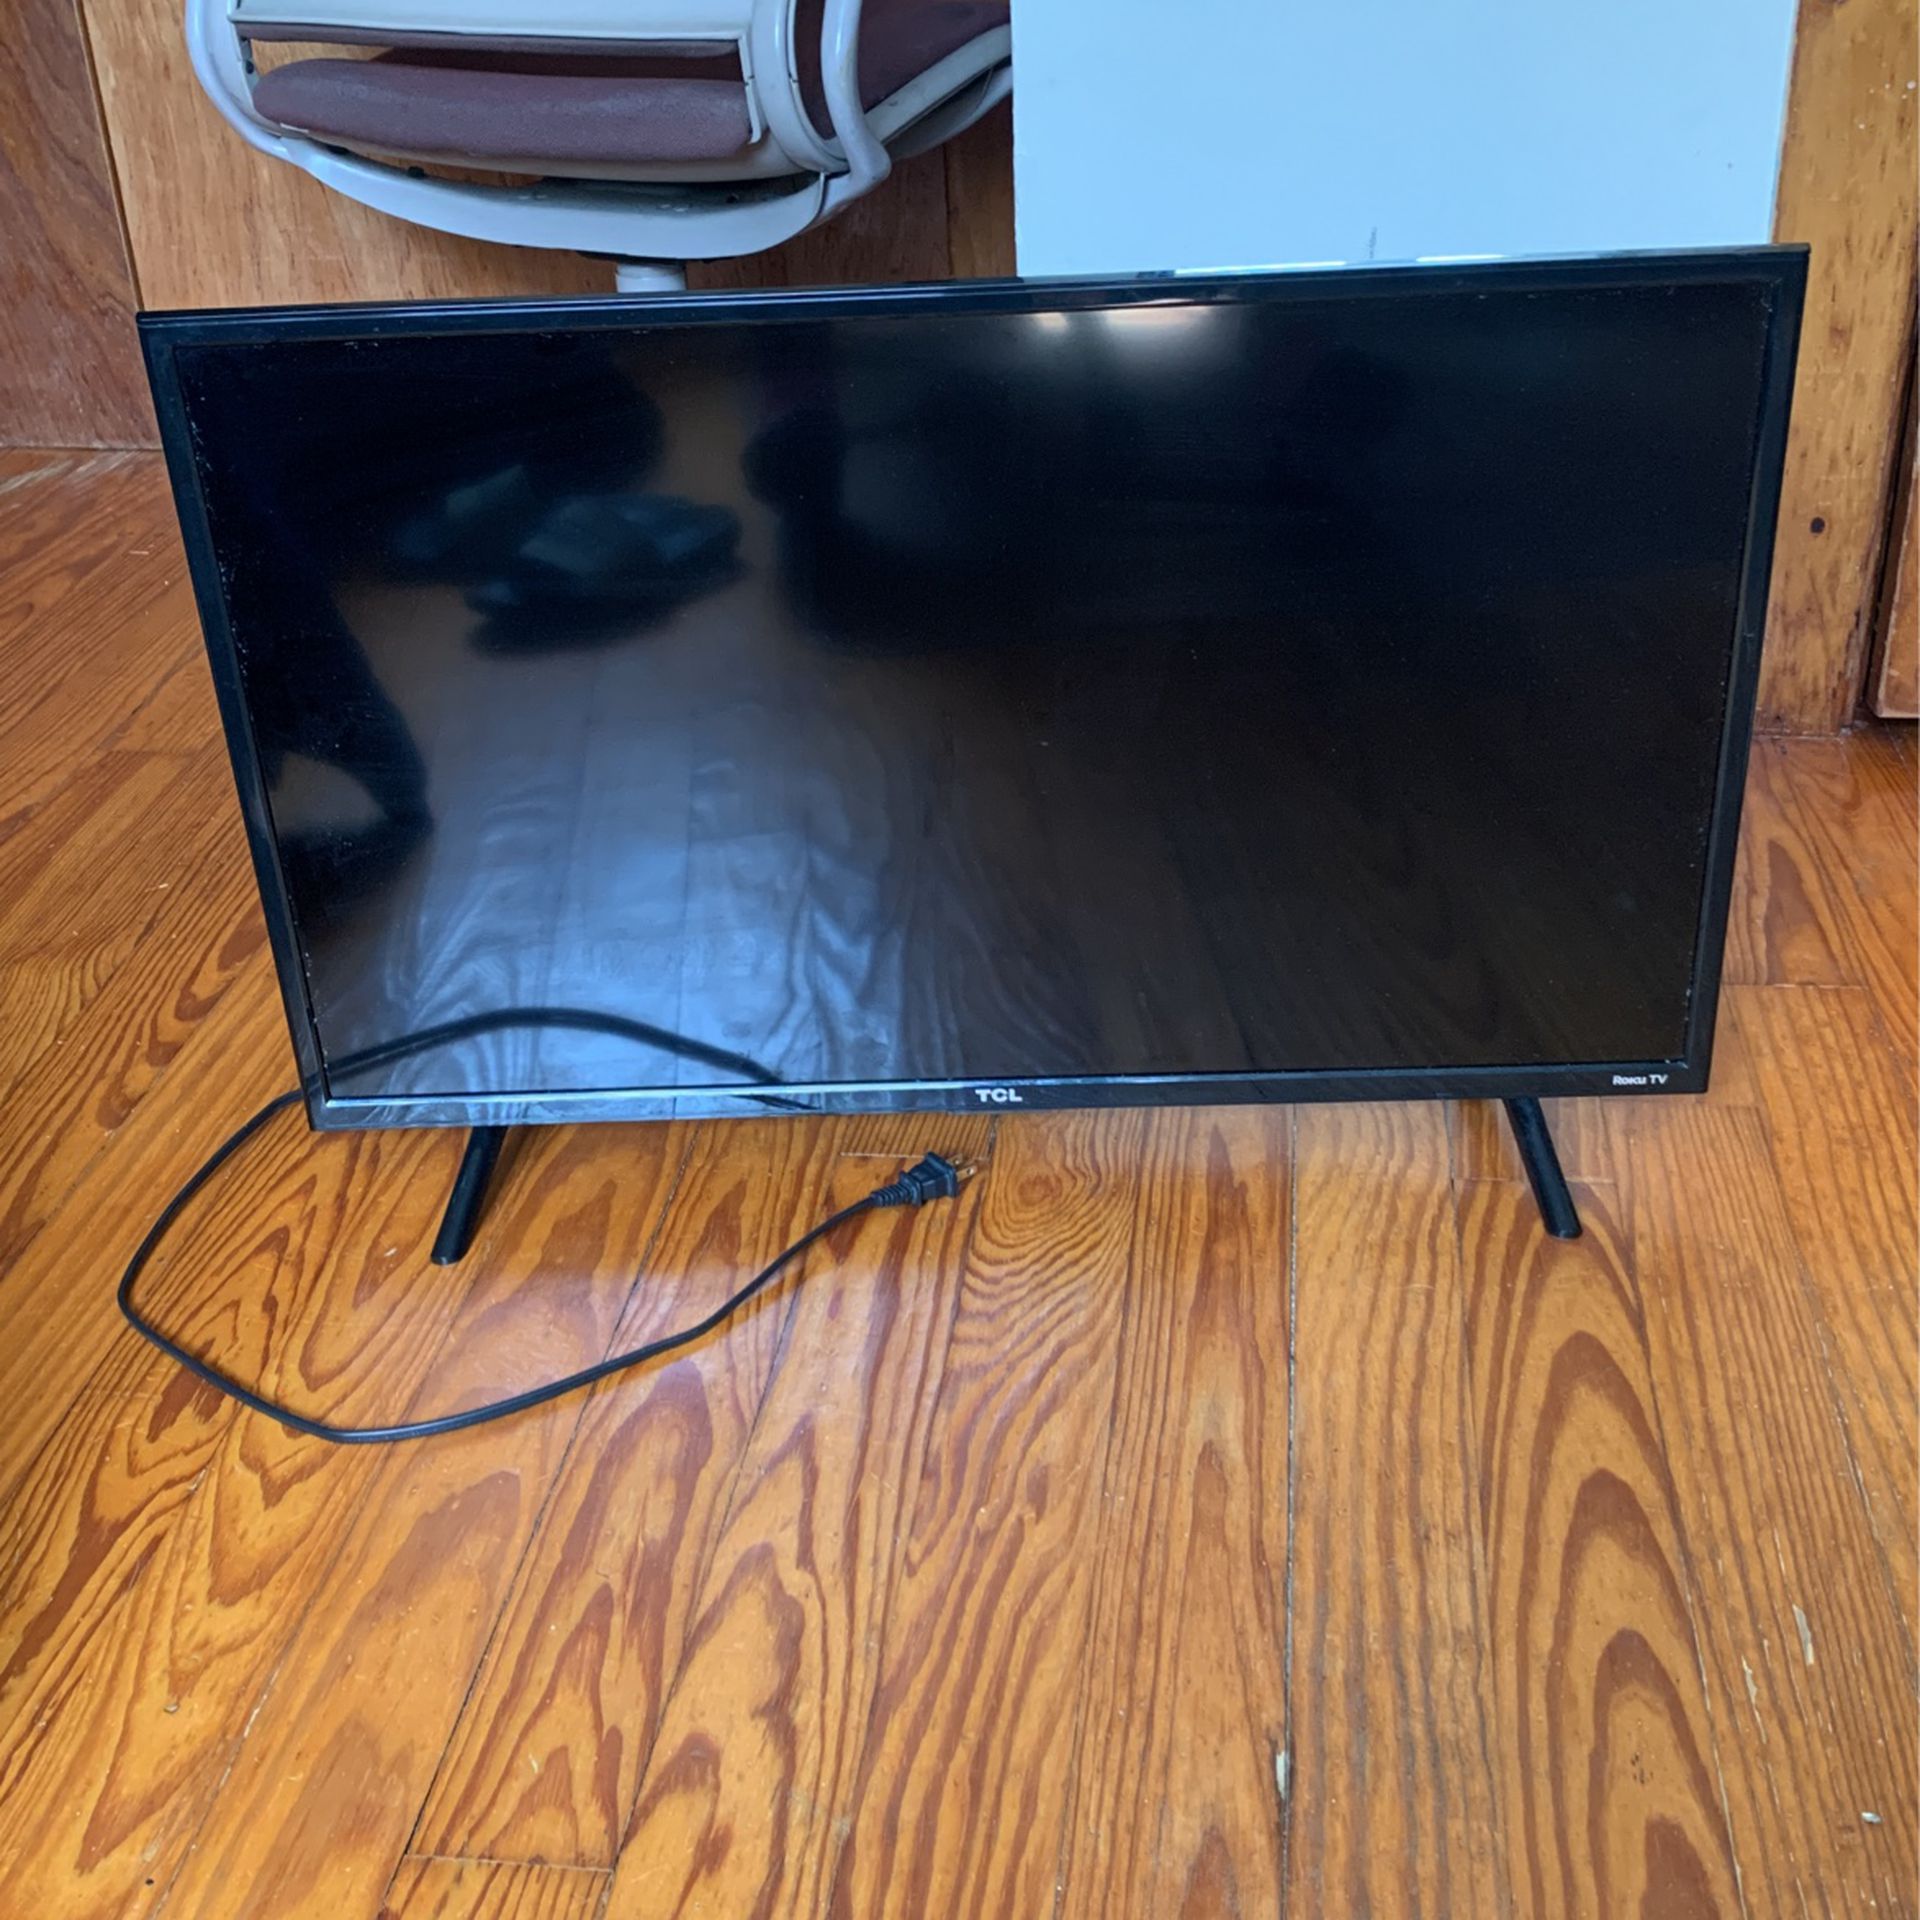 TCL 32” Smart TV Model: 32S301 Used 